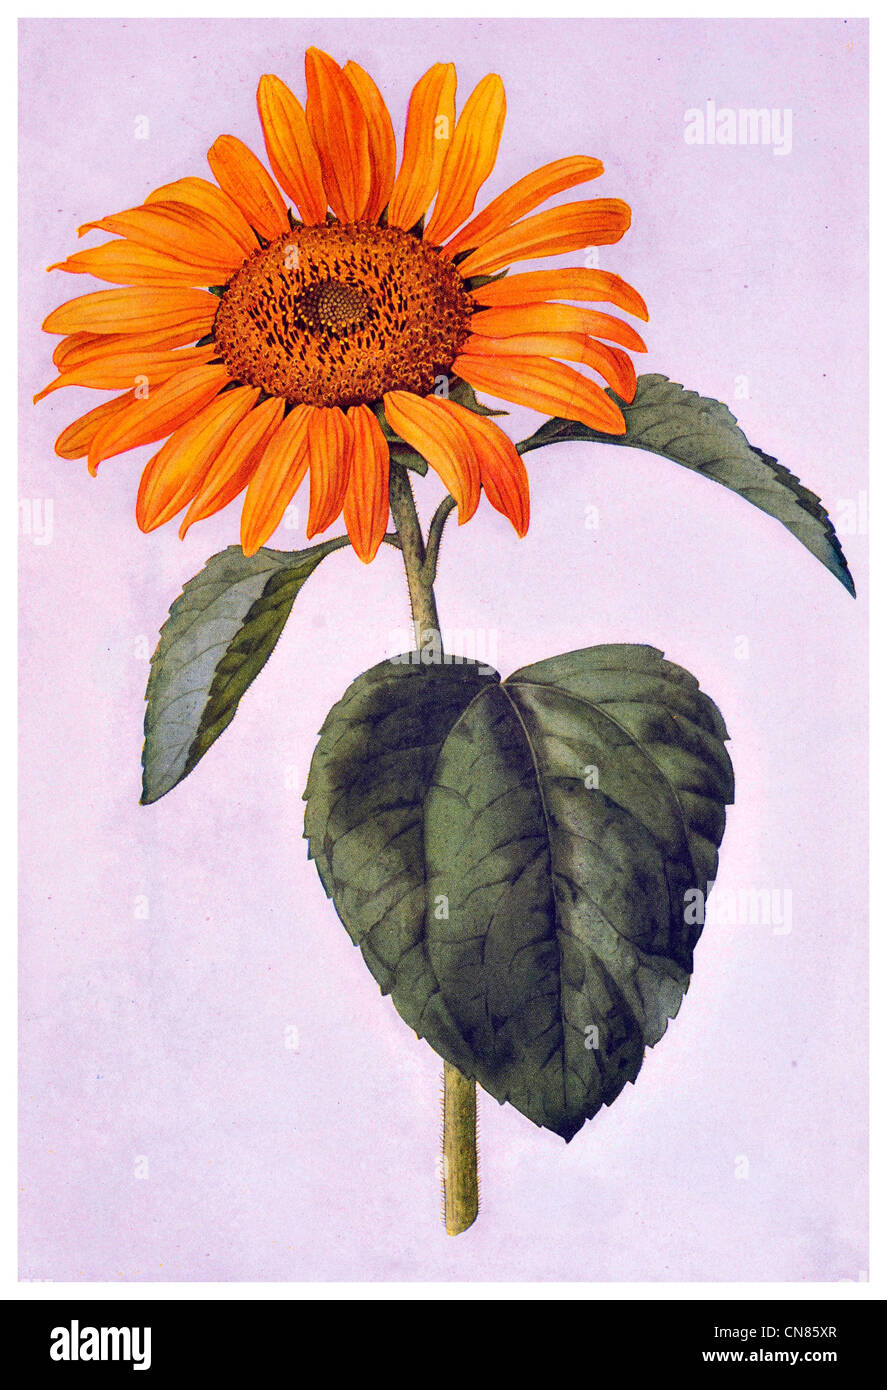 First published 1917 Common Sunflower Helianthus Annuus Stock Photo